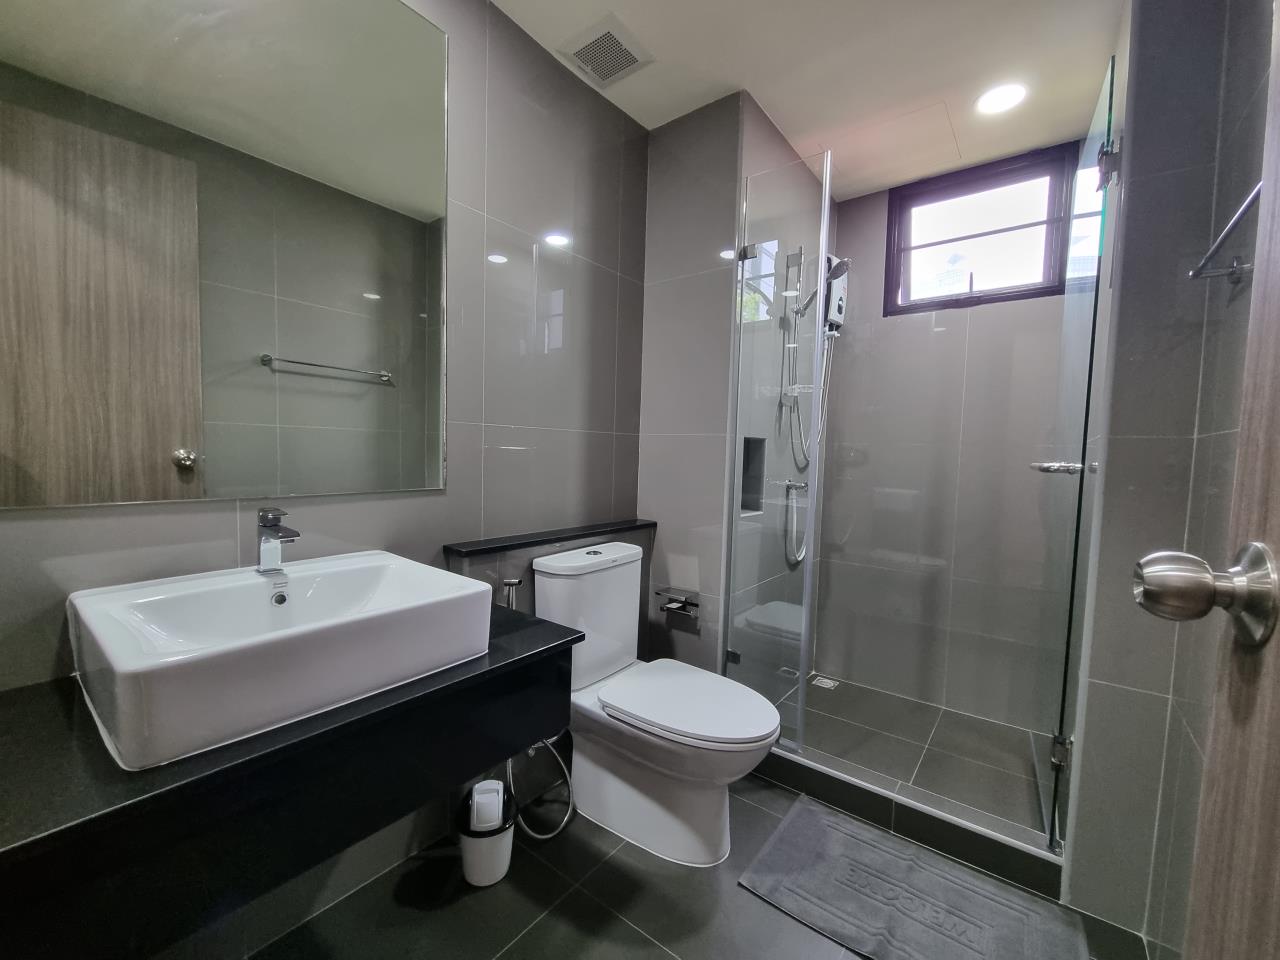 Japanthai Property Agency's *Serene 57* Brand-new property in great location in Thonglor.  11